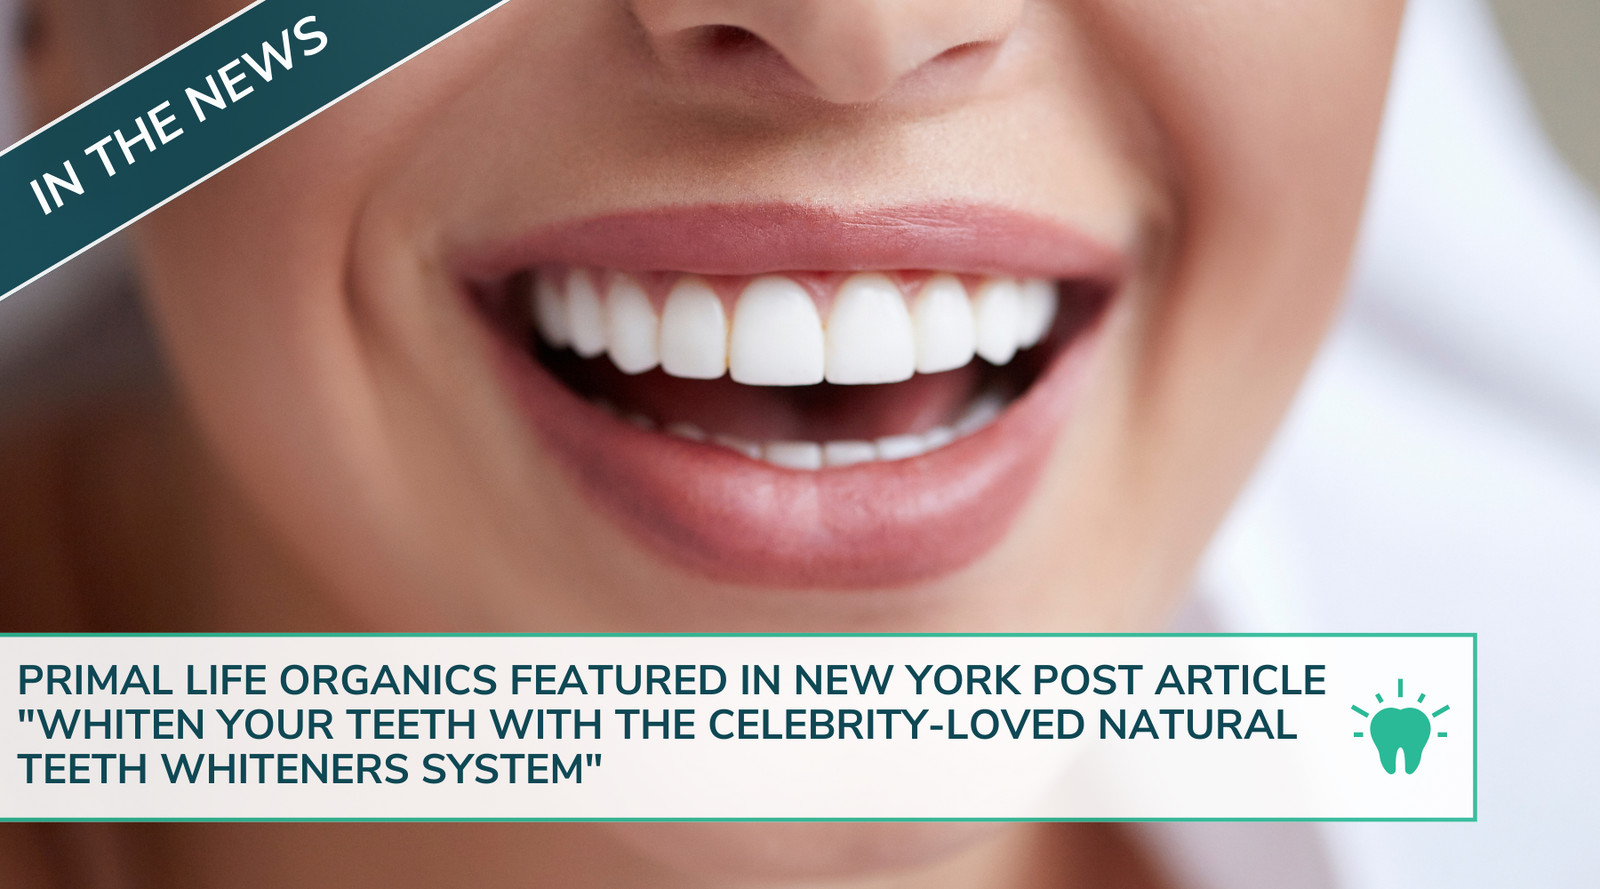 Primal Life Organics Featured In New York Post Article "Whiten Your Teeth With The Celebrity-Loved Natural Teeth Whiteners System"